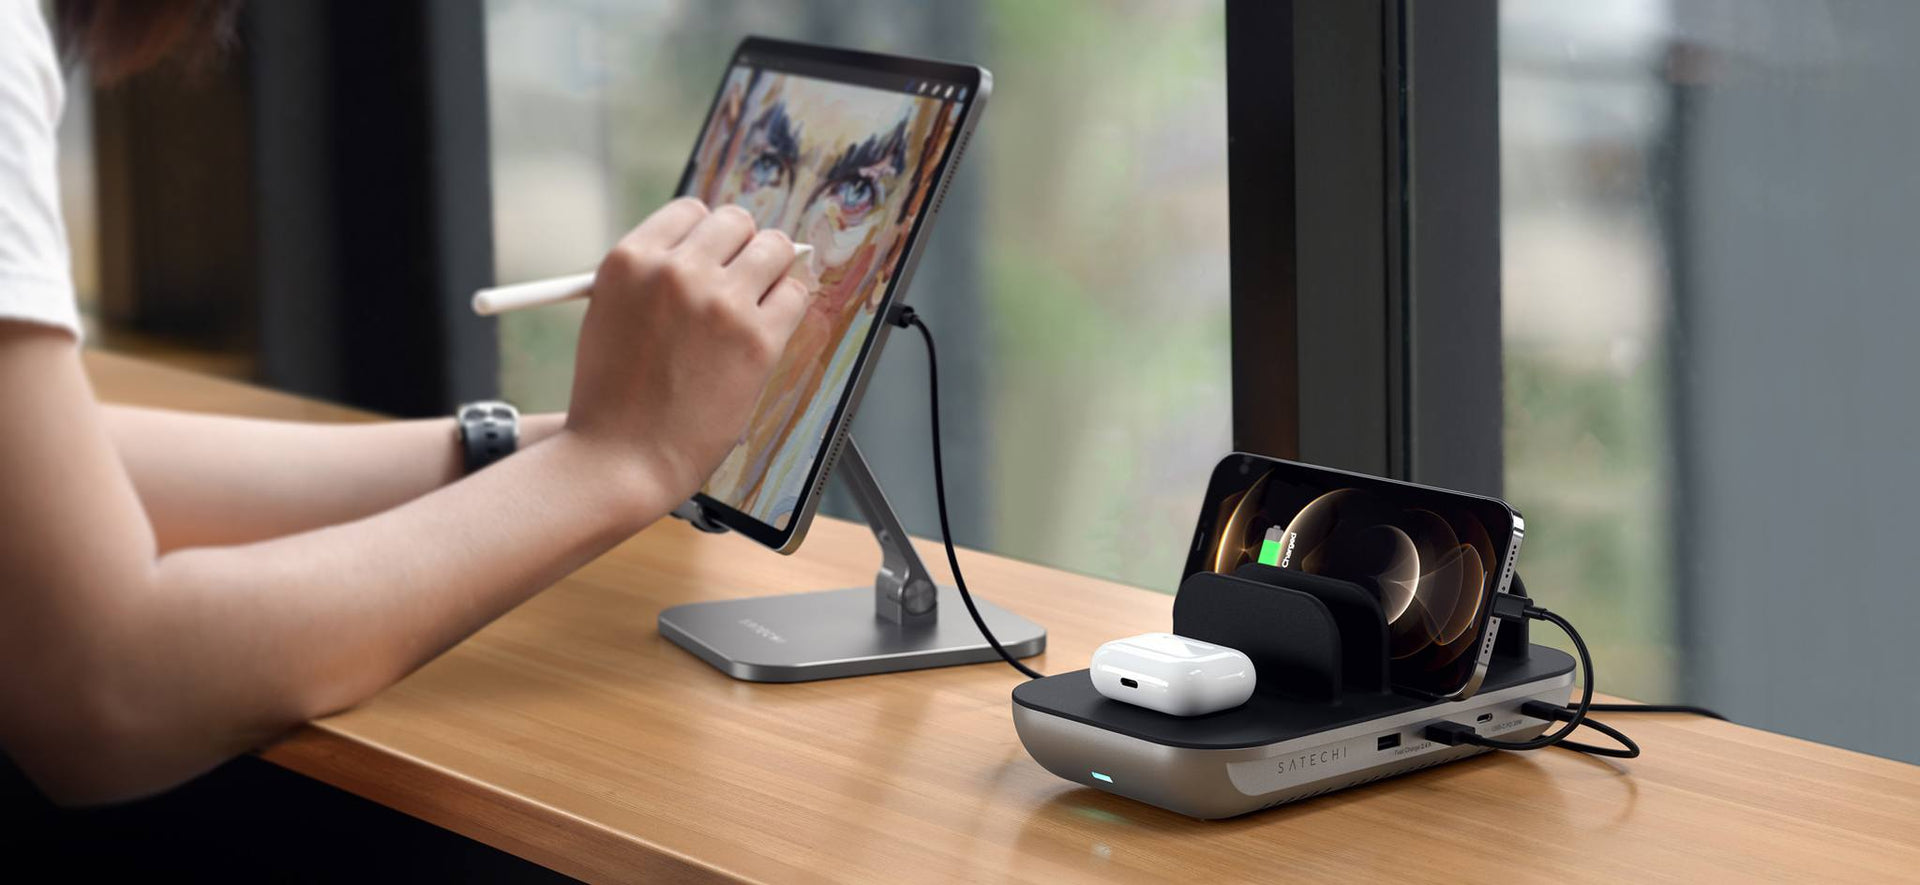 Dock5 Multi-Device Charging Station